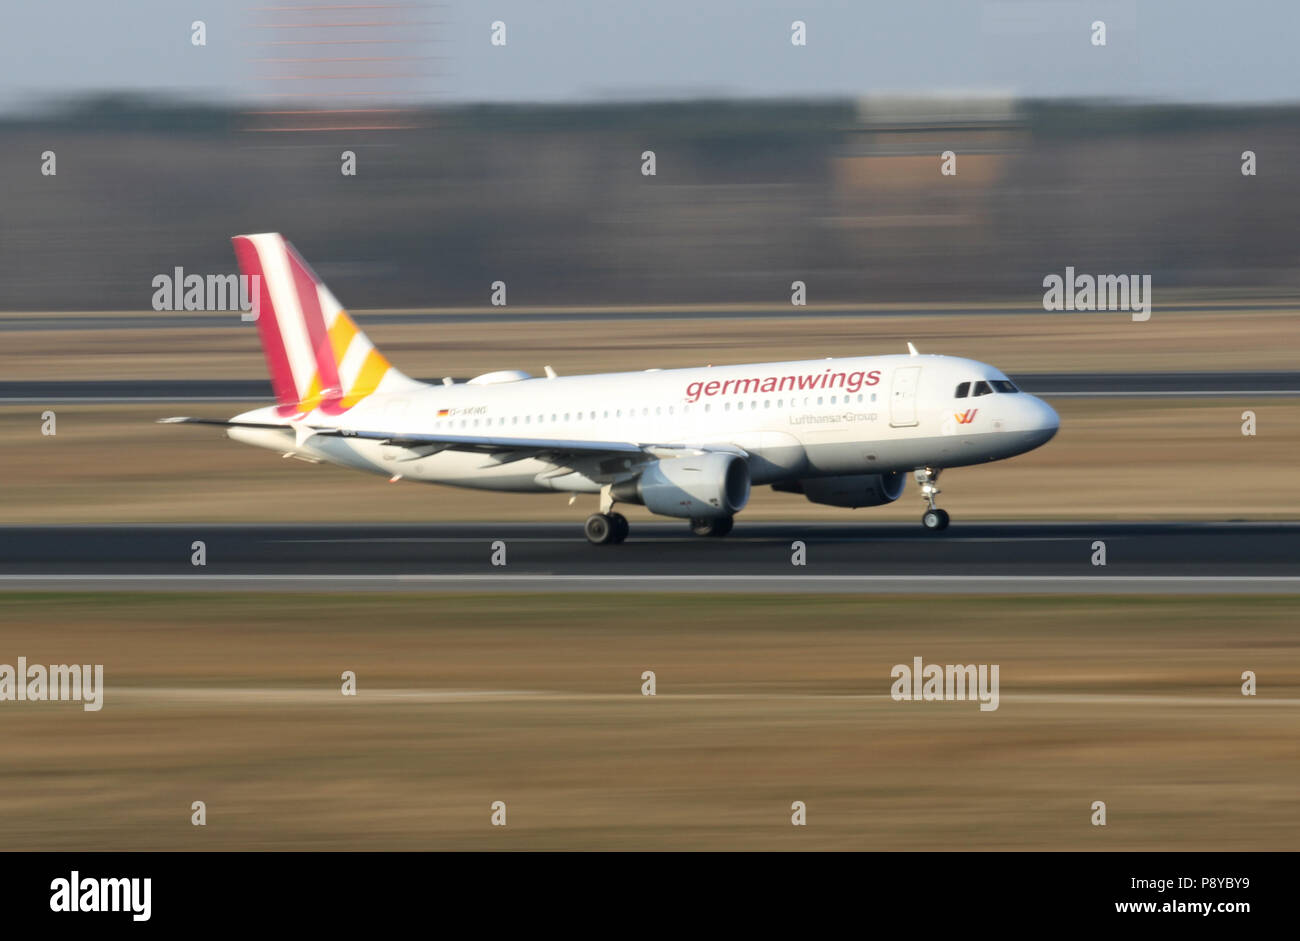 Berlin, Germany, Airbus A319 of the airline germanwings on the runway of the airport Berlin-Tegel Stock Photo